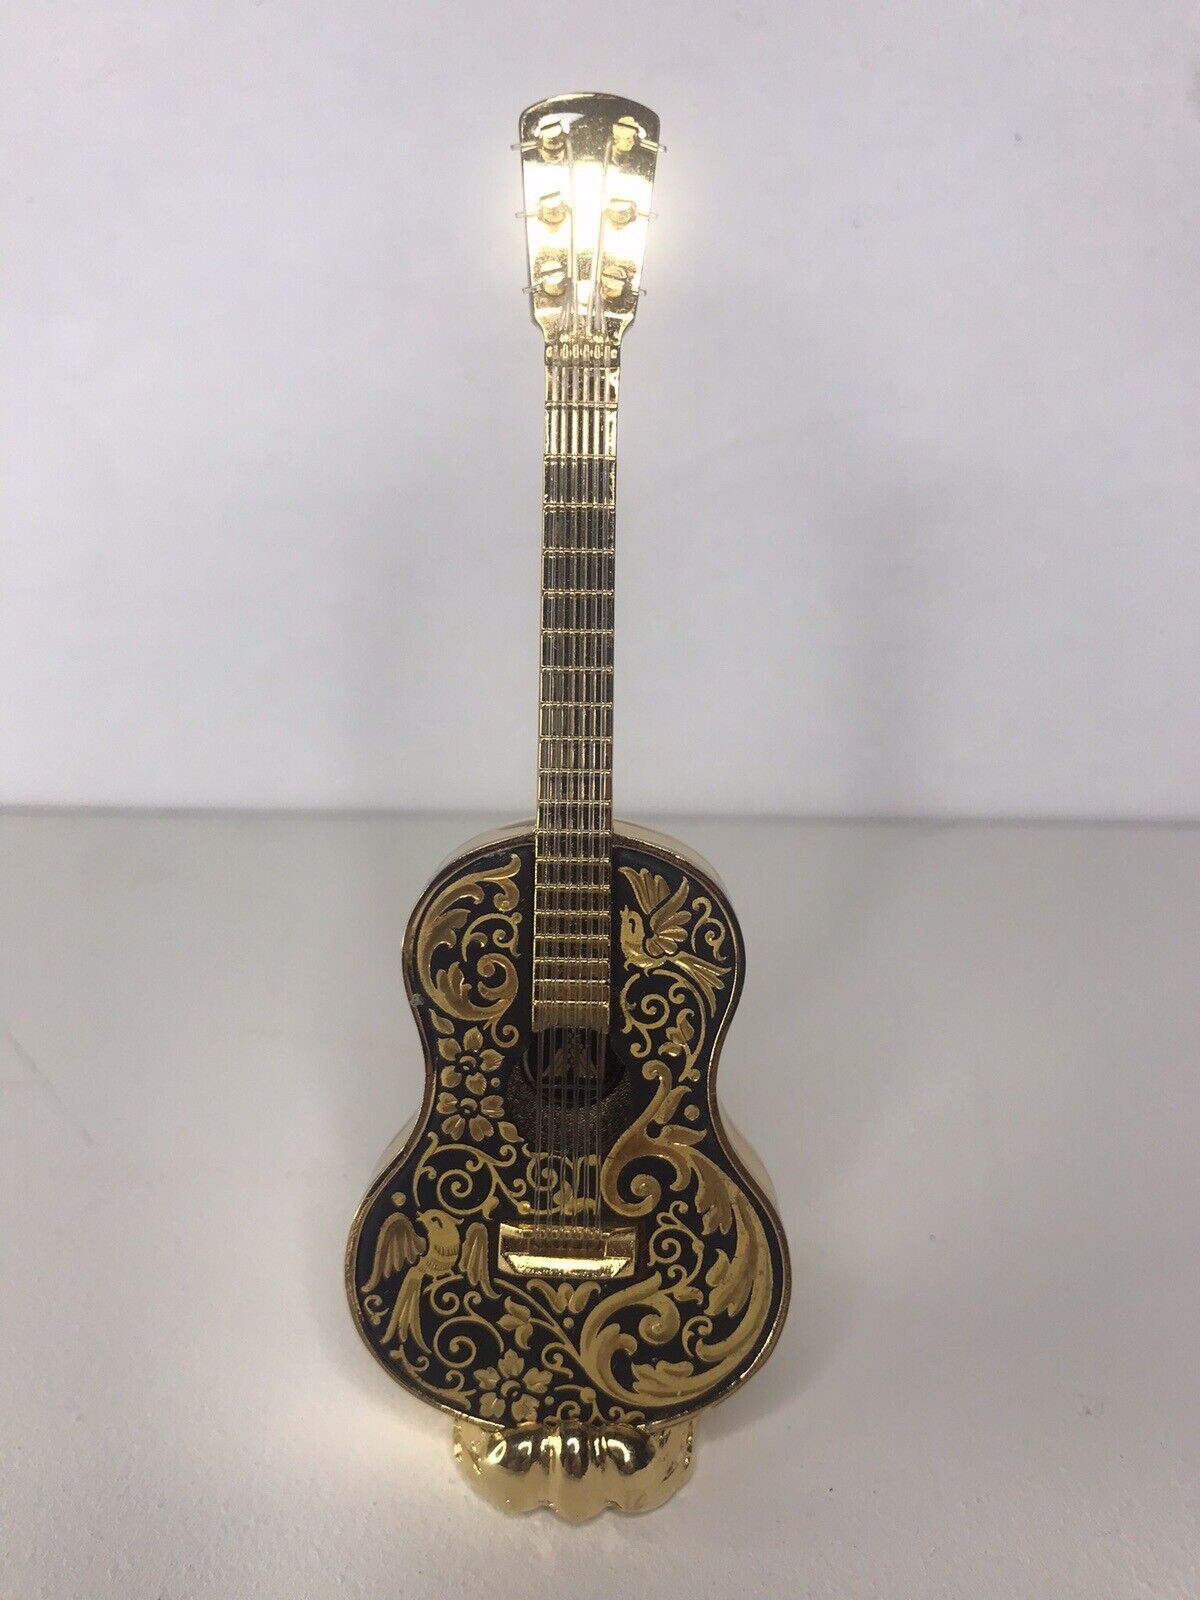 Damascene Gold Plated Miniature Guitar With Stand And Box 7”